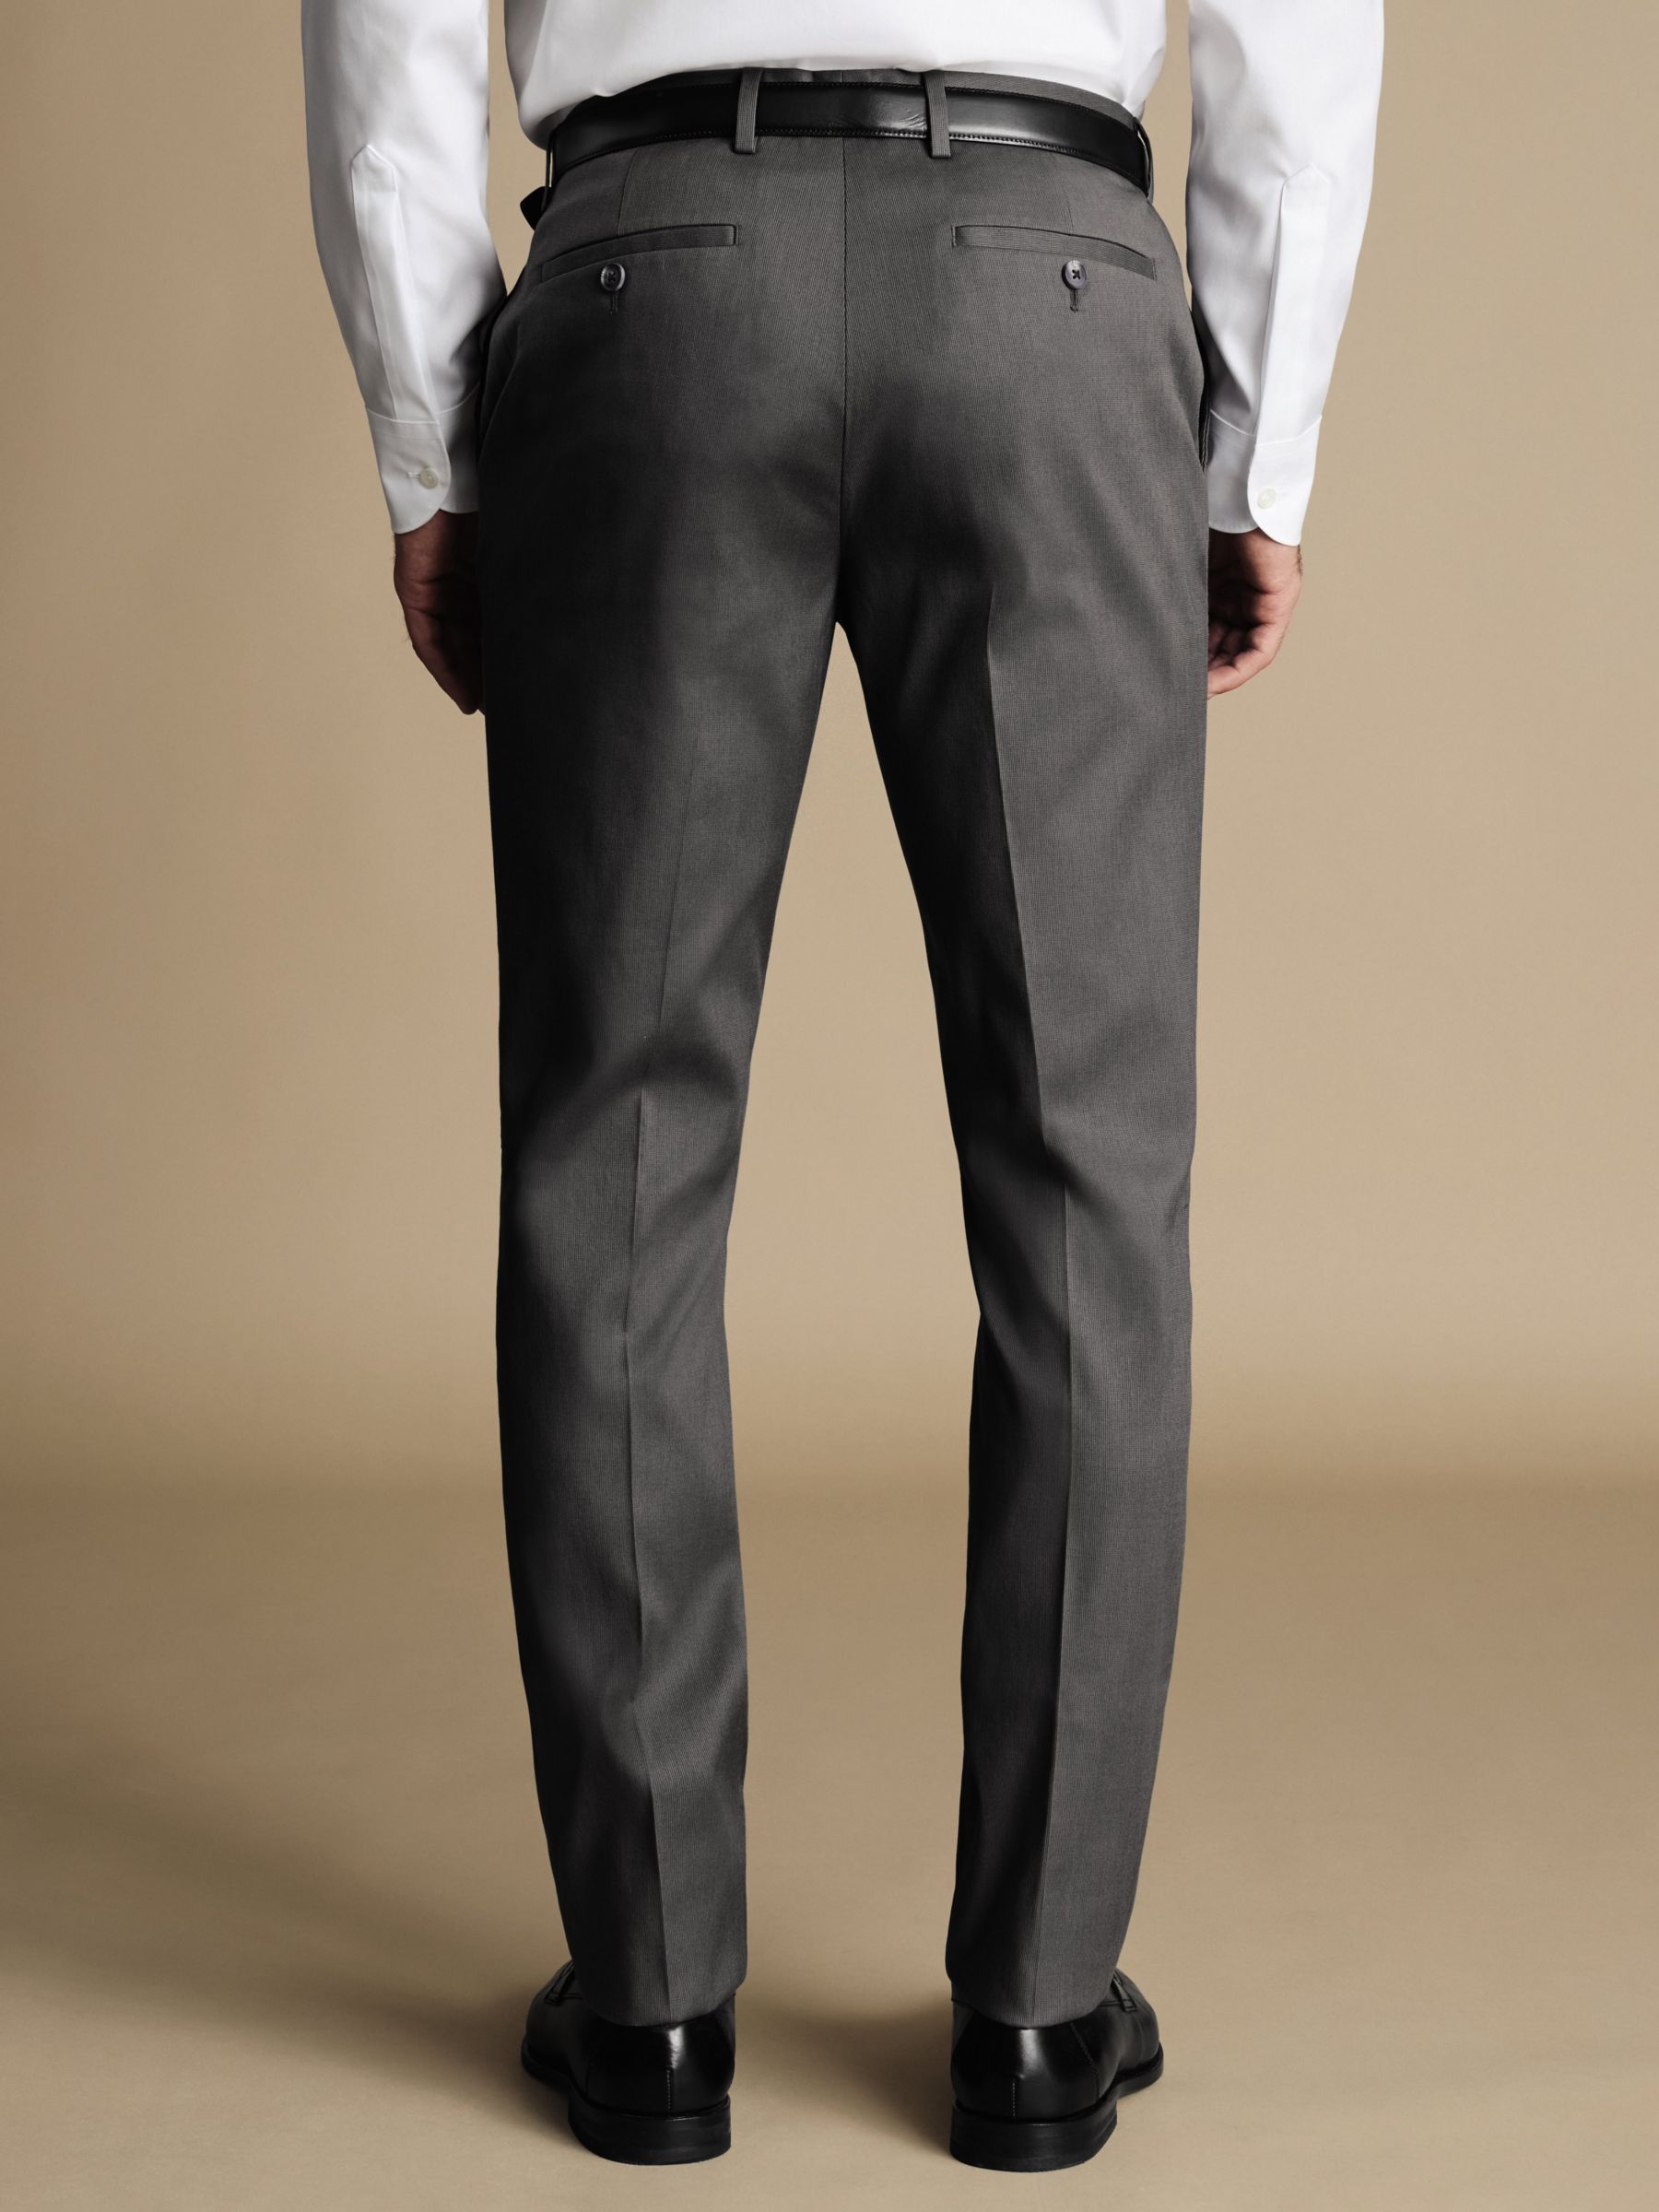 Charles Tyrwhitt Smart Texture Classic Fit Trousers, Charcoal Grey at ...